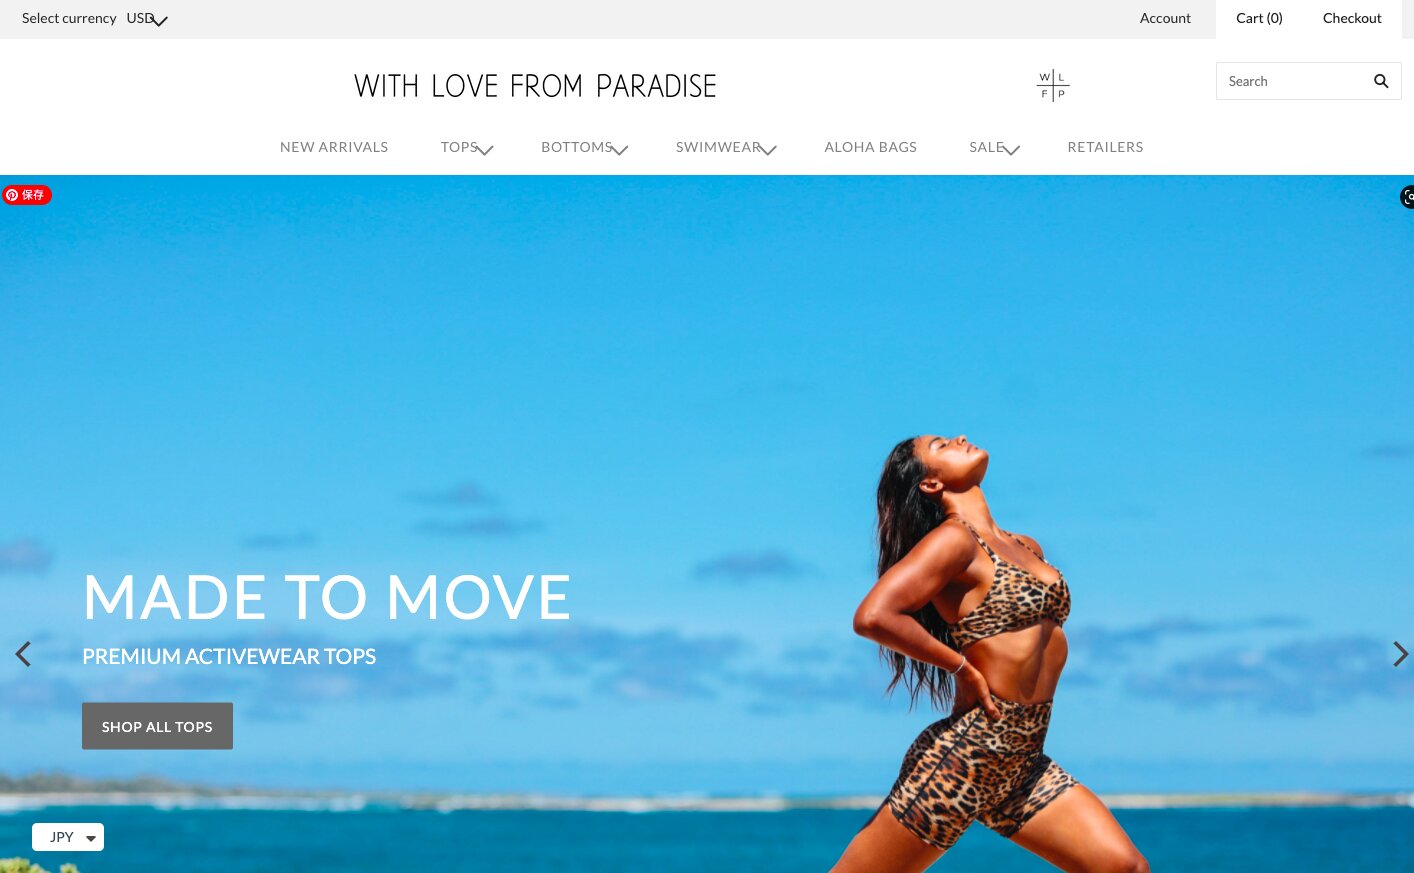 https://www.withlovefromparadise.com